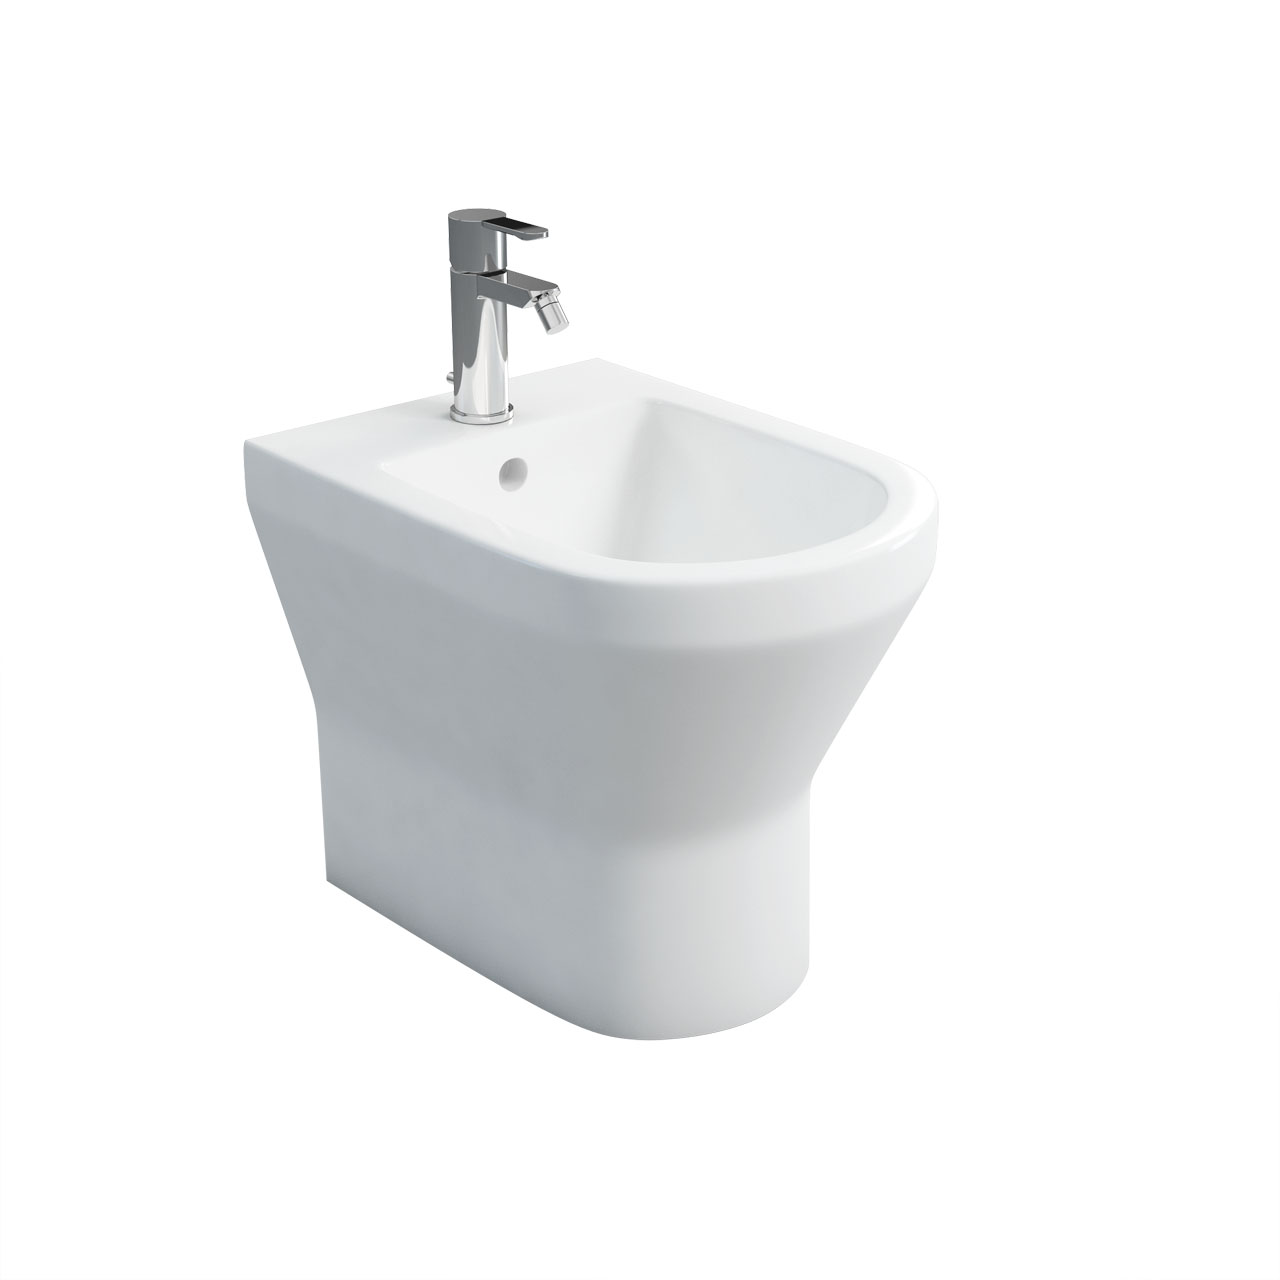 Curve S30 back to wall bidet